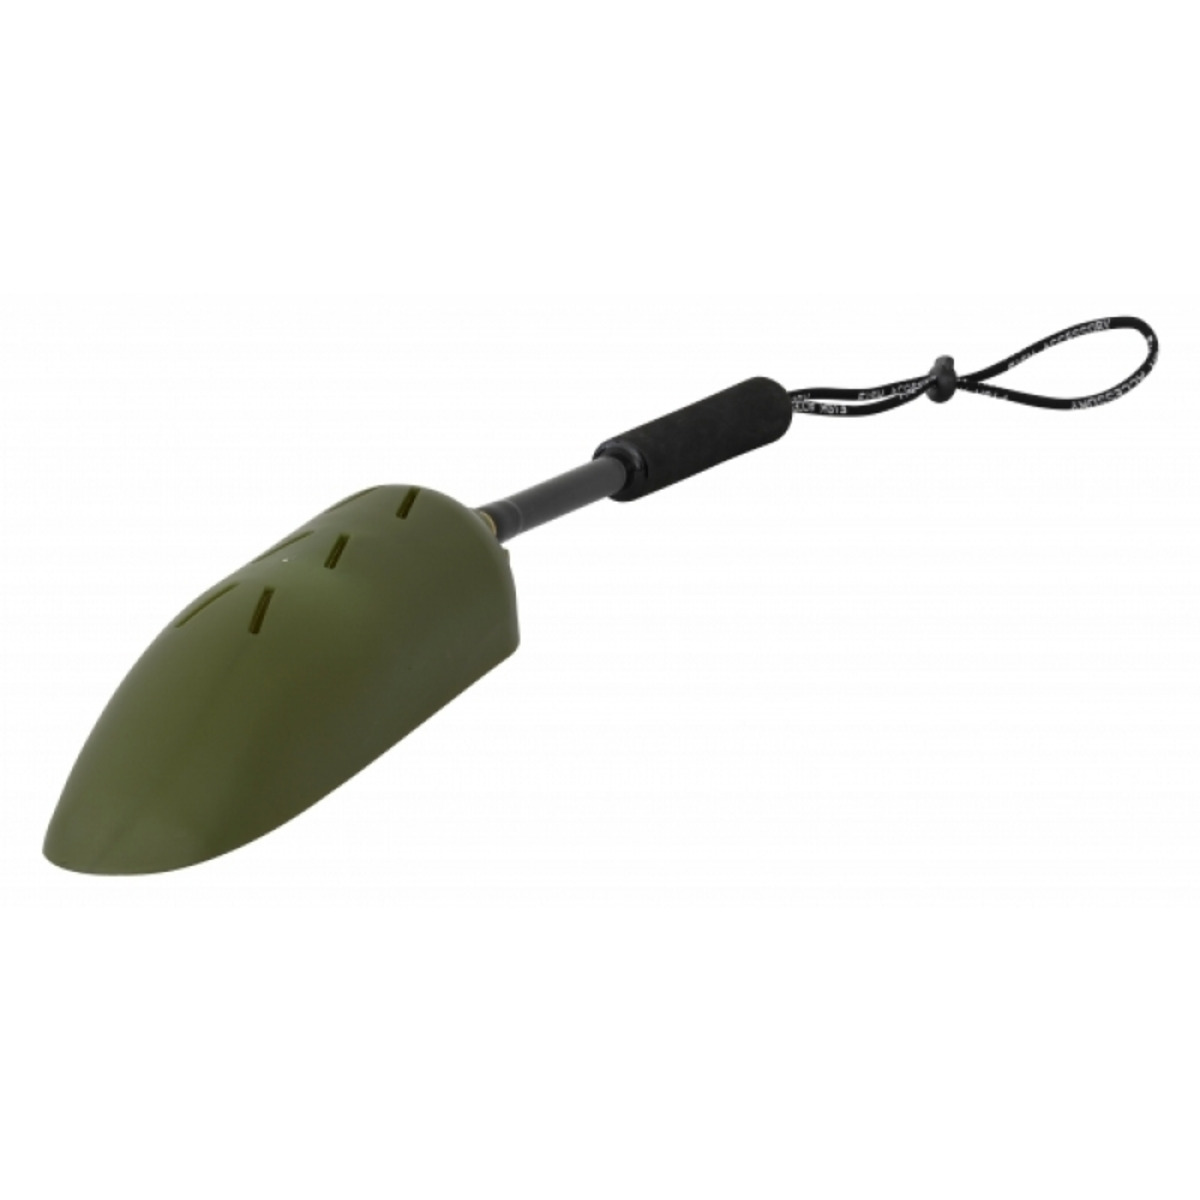 Starbaits Baiting Spoon With Handle - LARGE